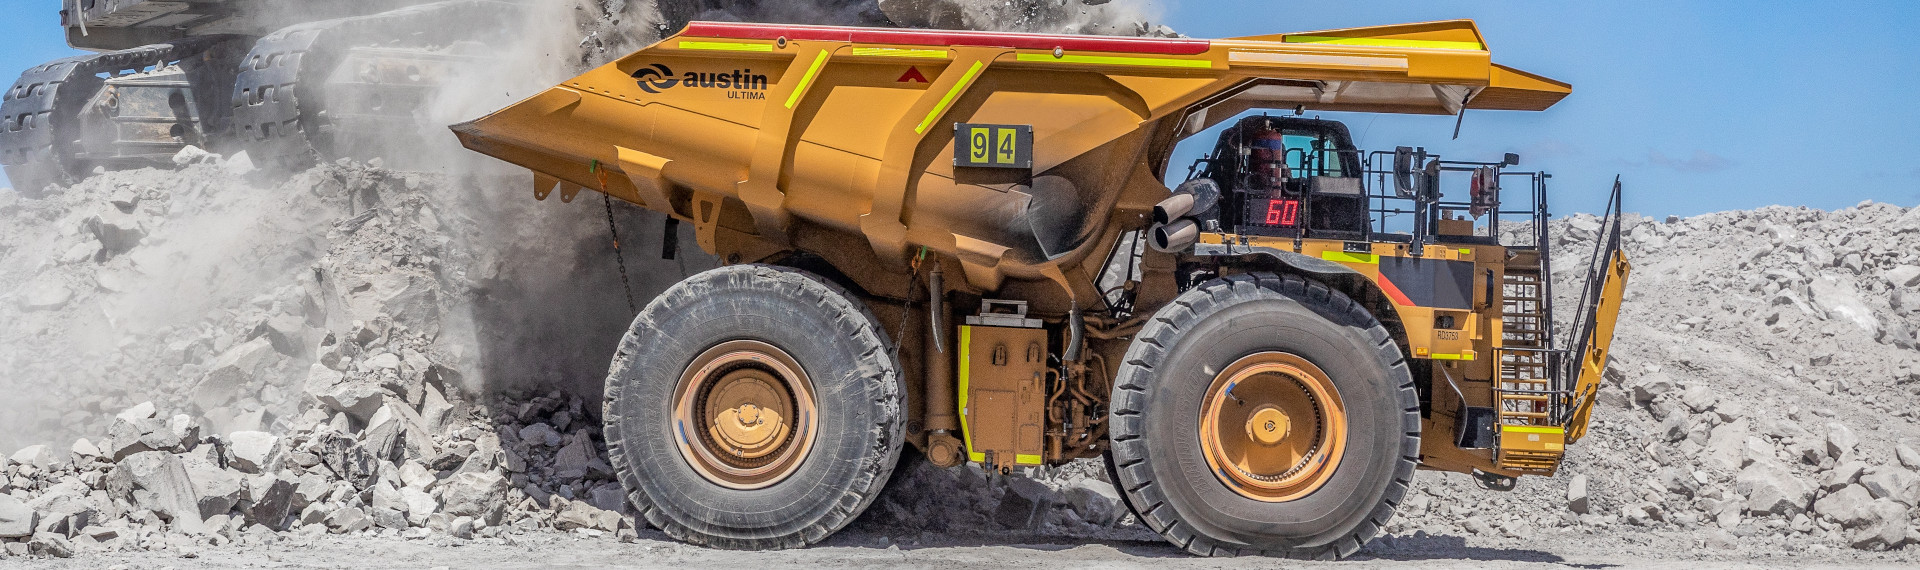 Austin’s supersized mining truck, which weighs 25% less thanks to Hardox® 500 Tuf